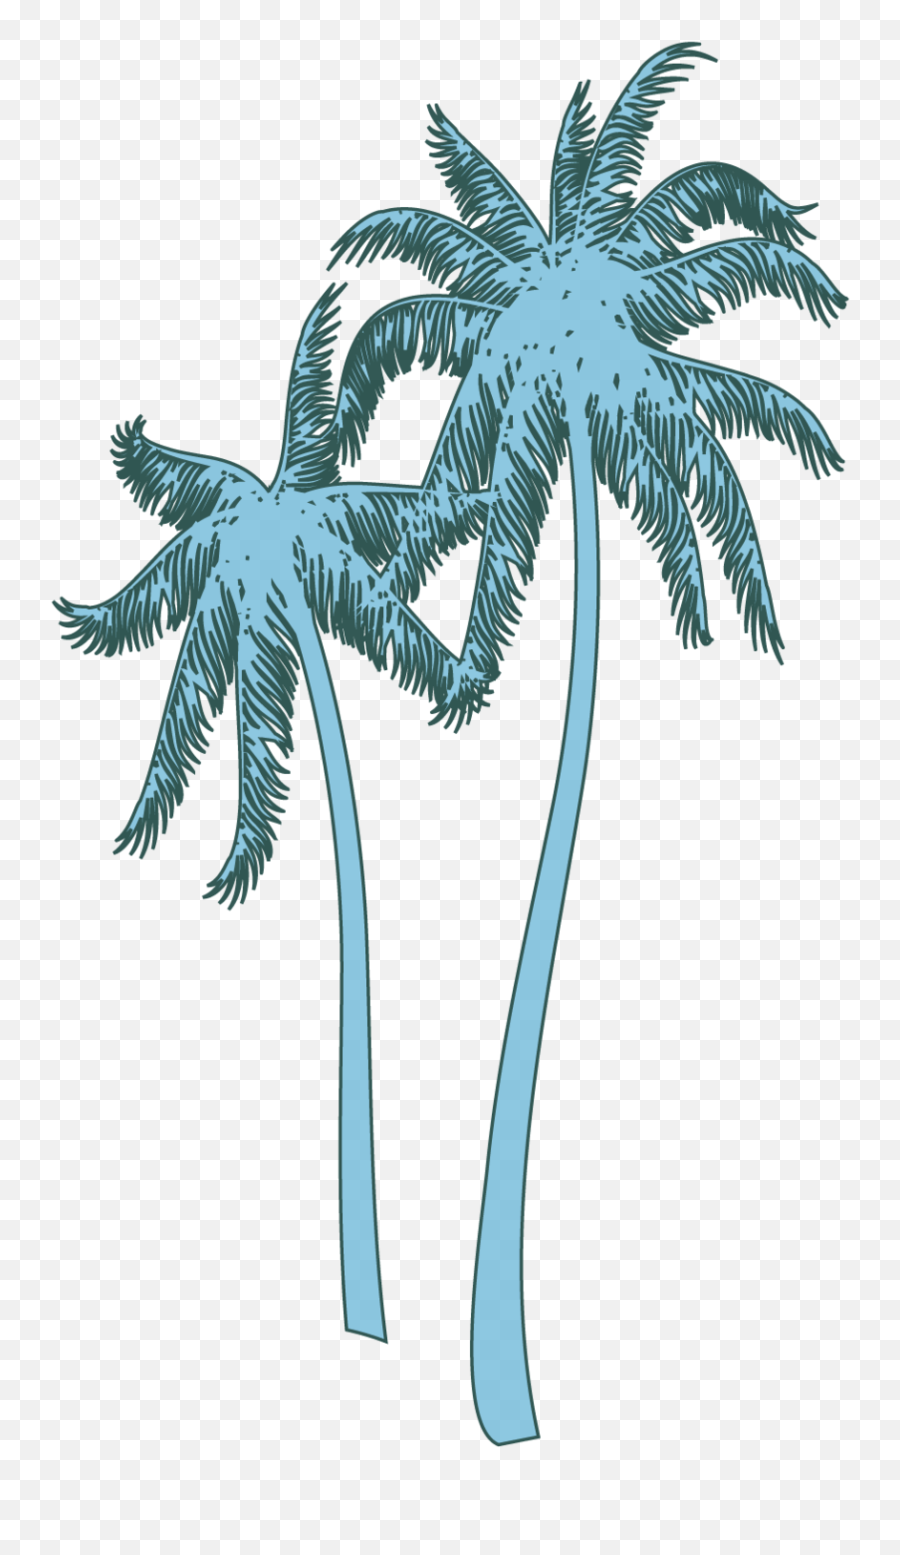 Download Coconut Tree Png Image With No - Roystonea,Coconut Tree Png